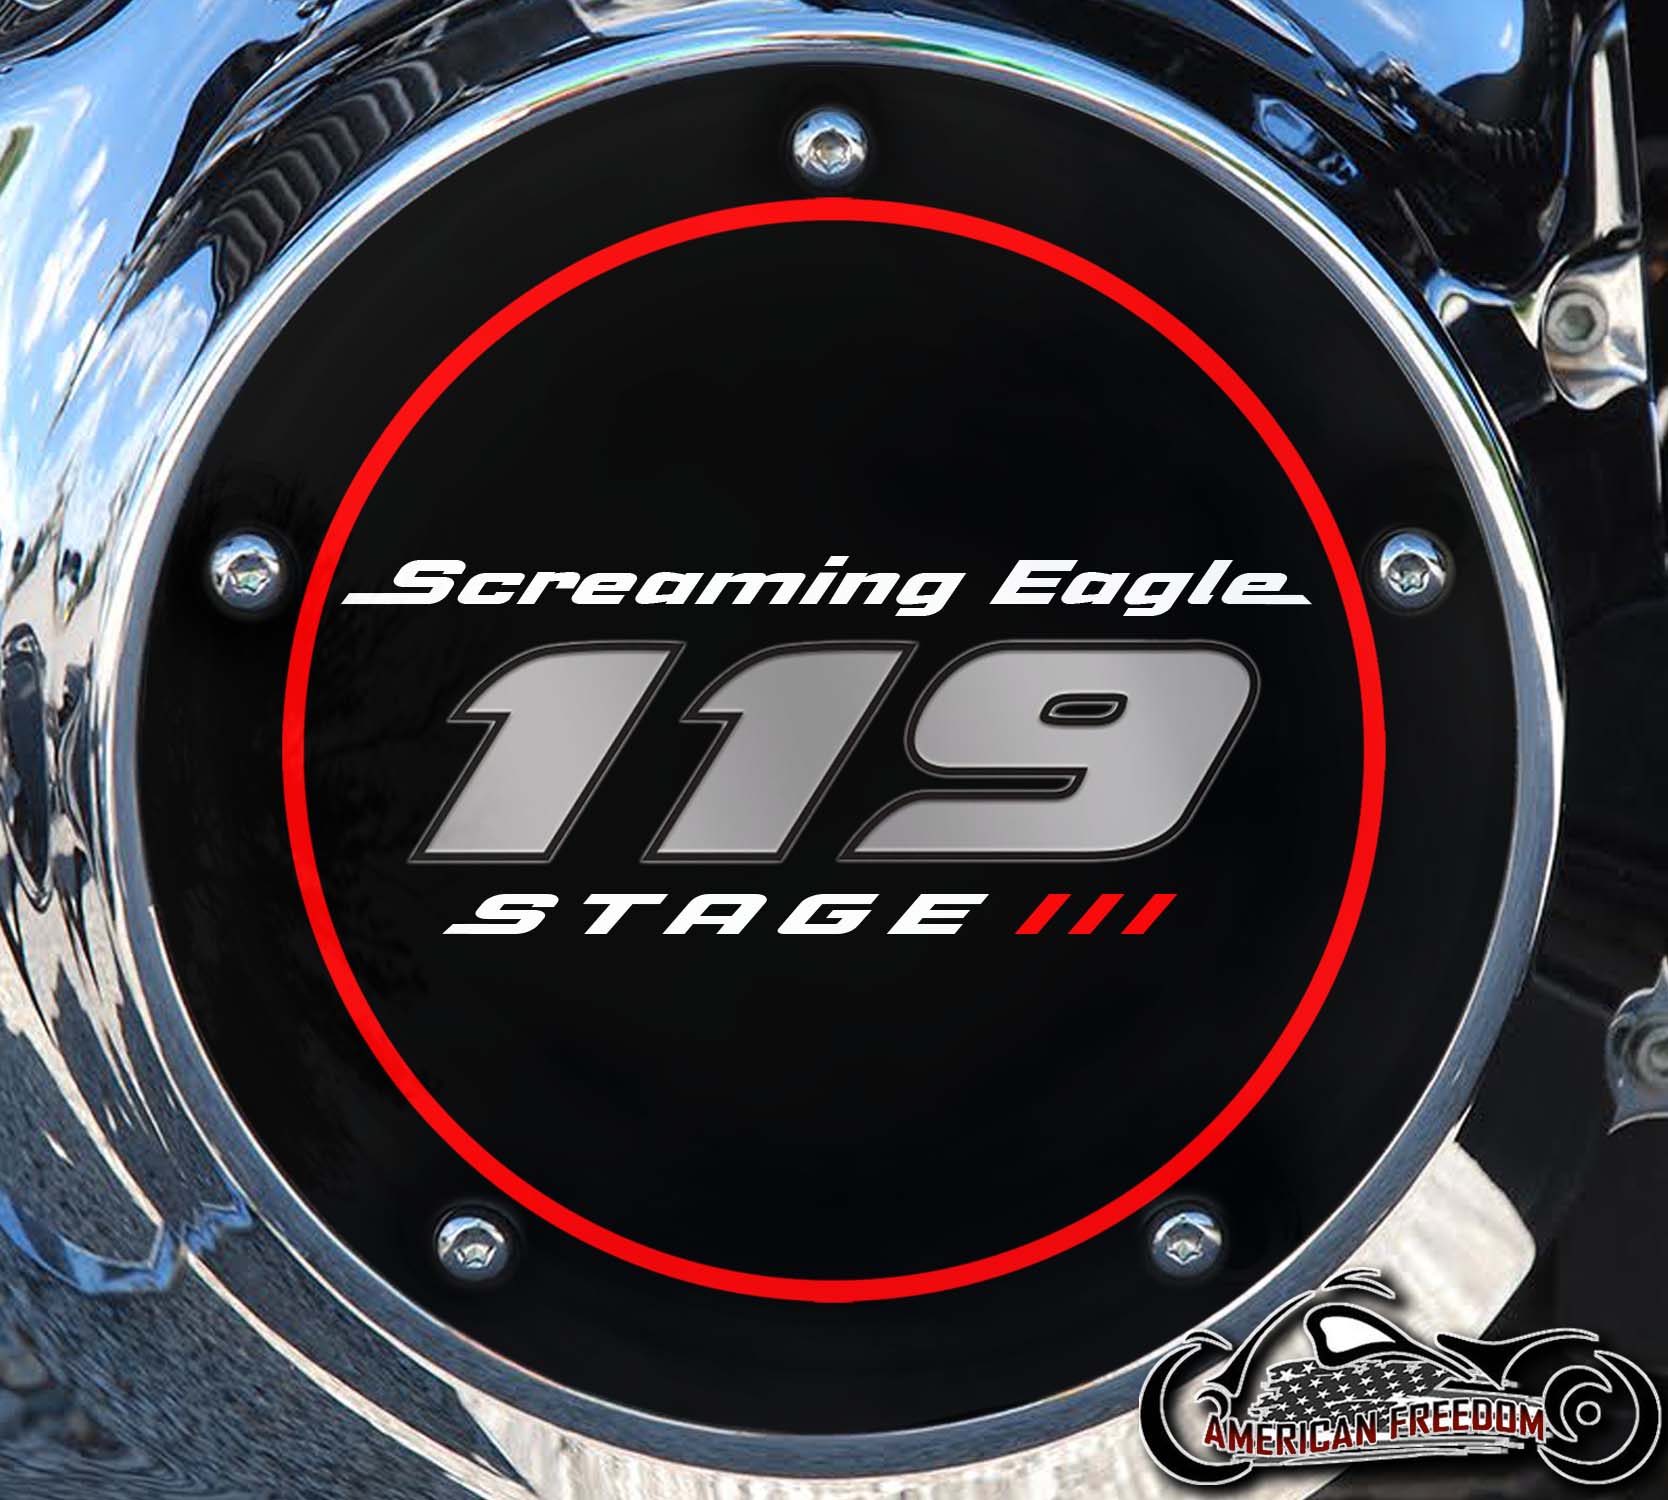 Screaming Eagle Stage III 119 Derby Cover OL